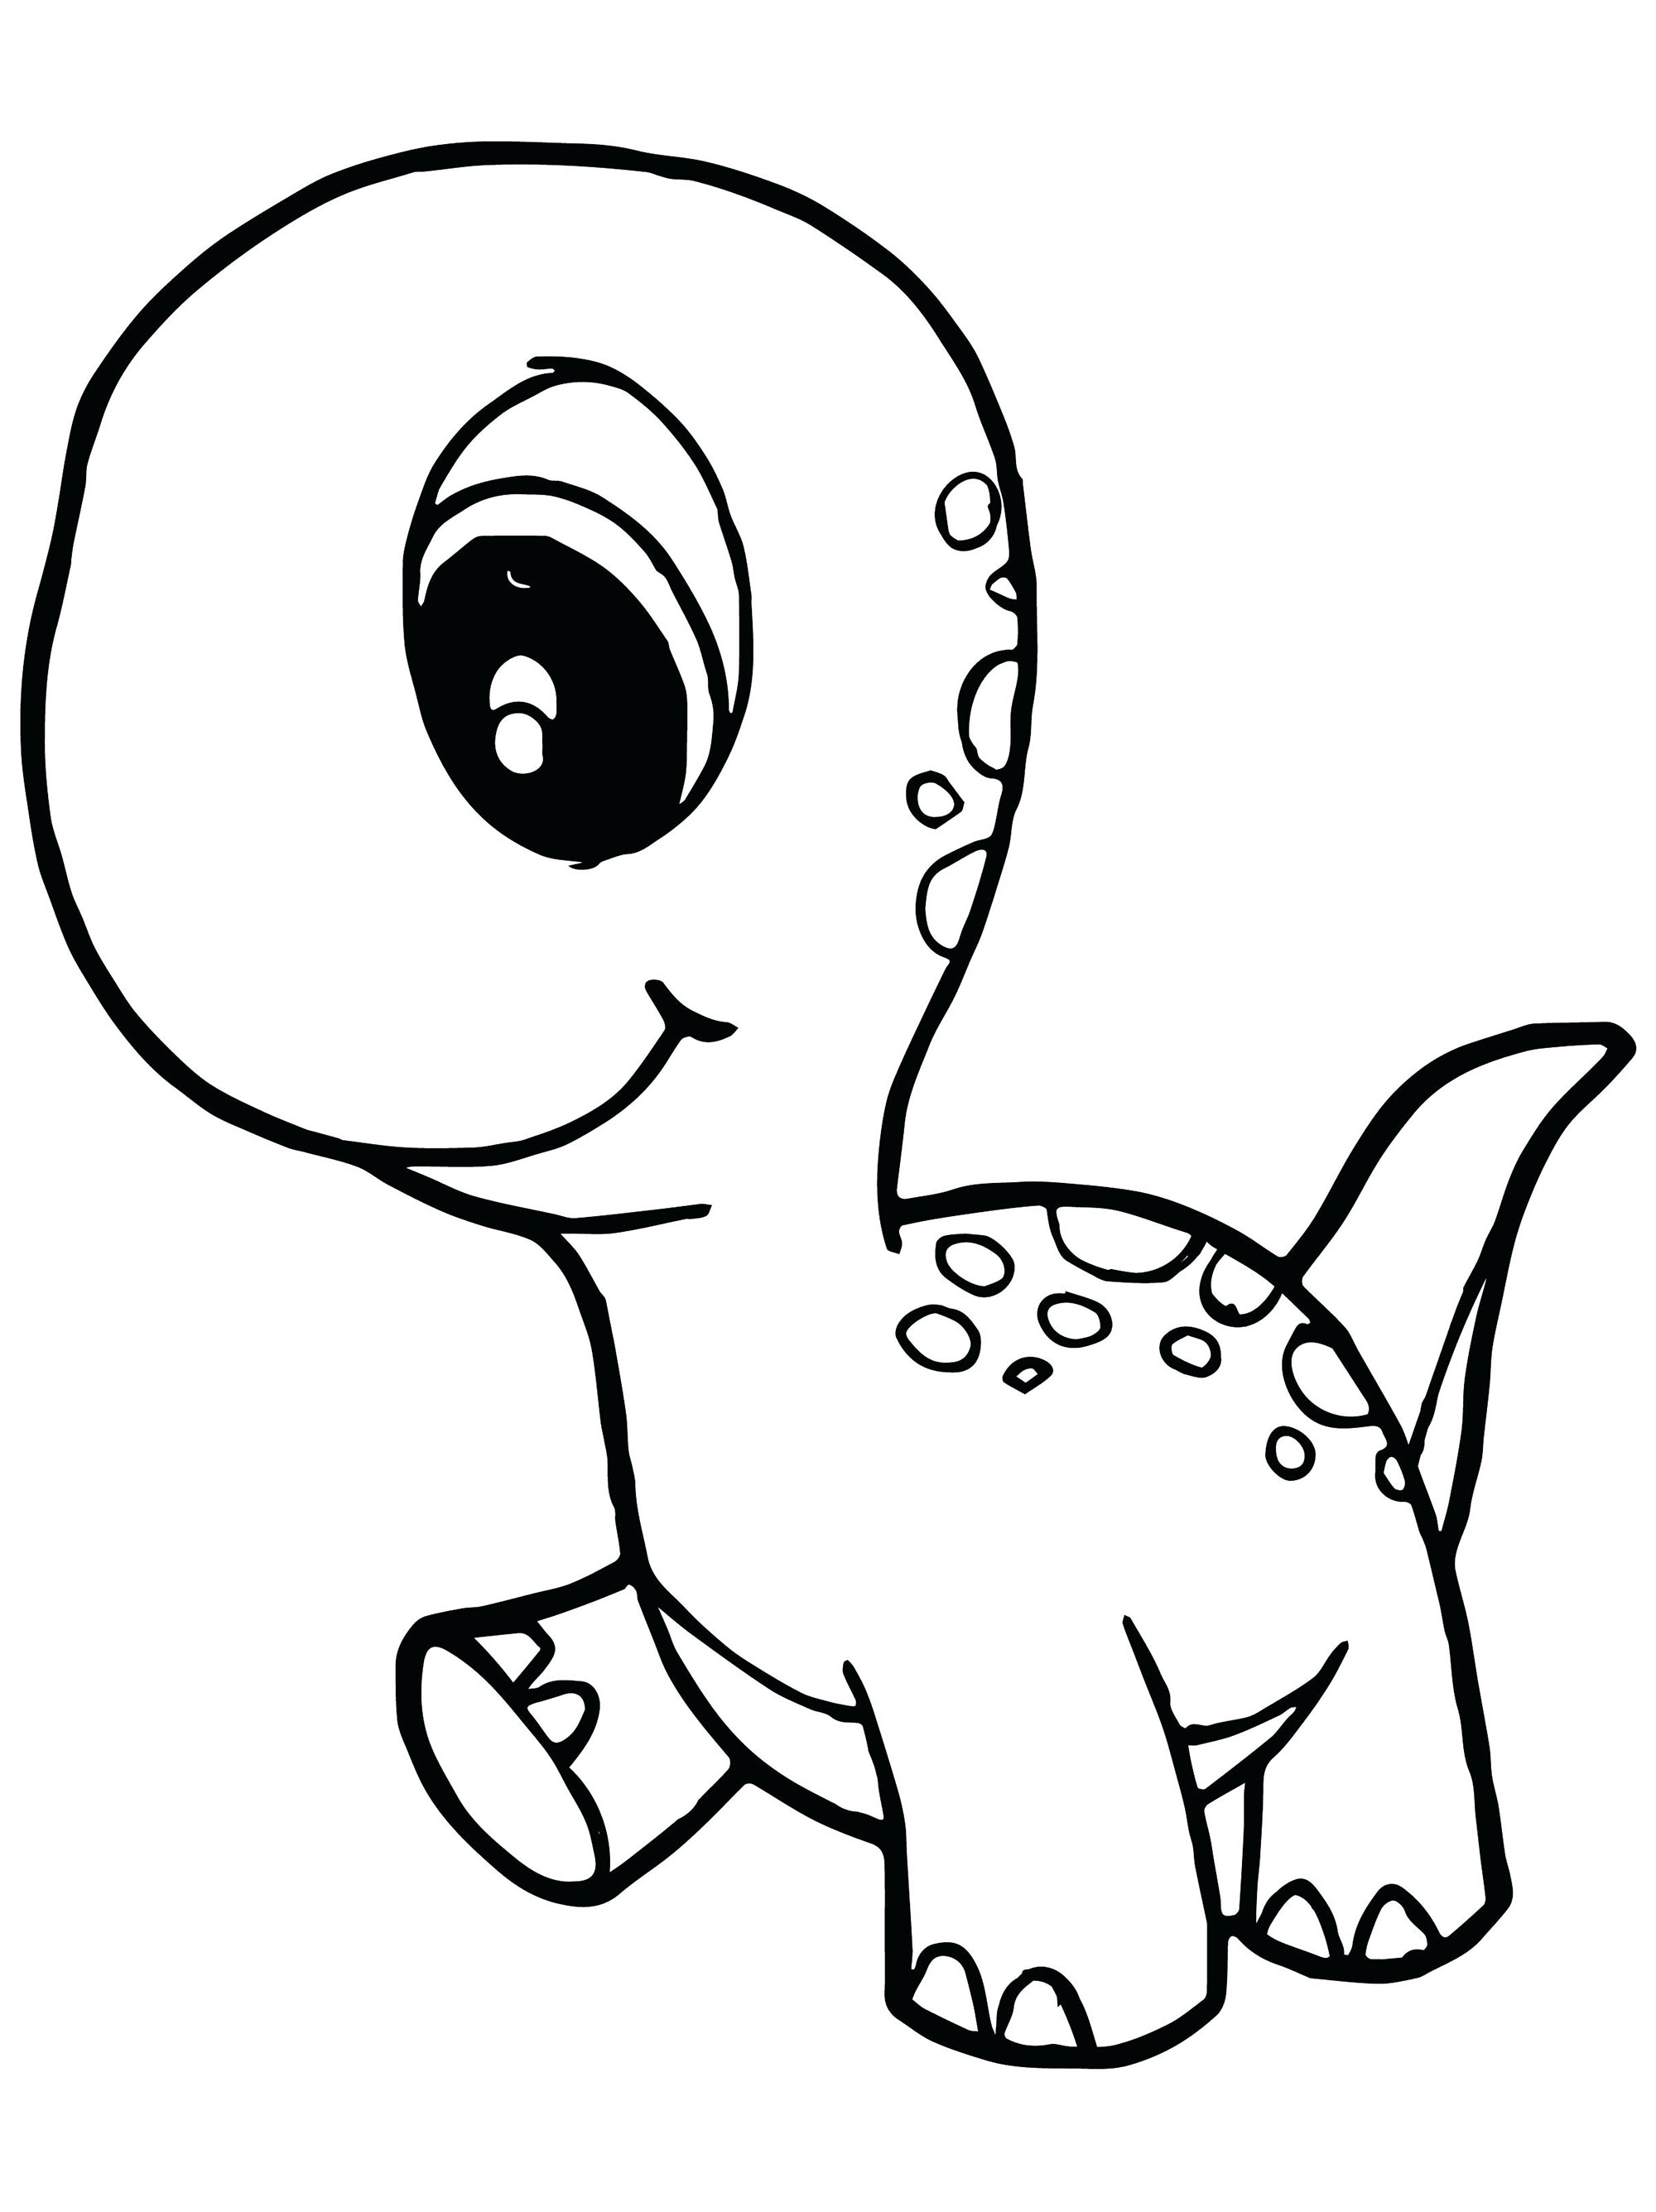 Dinosaurs to download - Dinosaurs Kids Coloring Pages